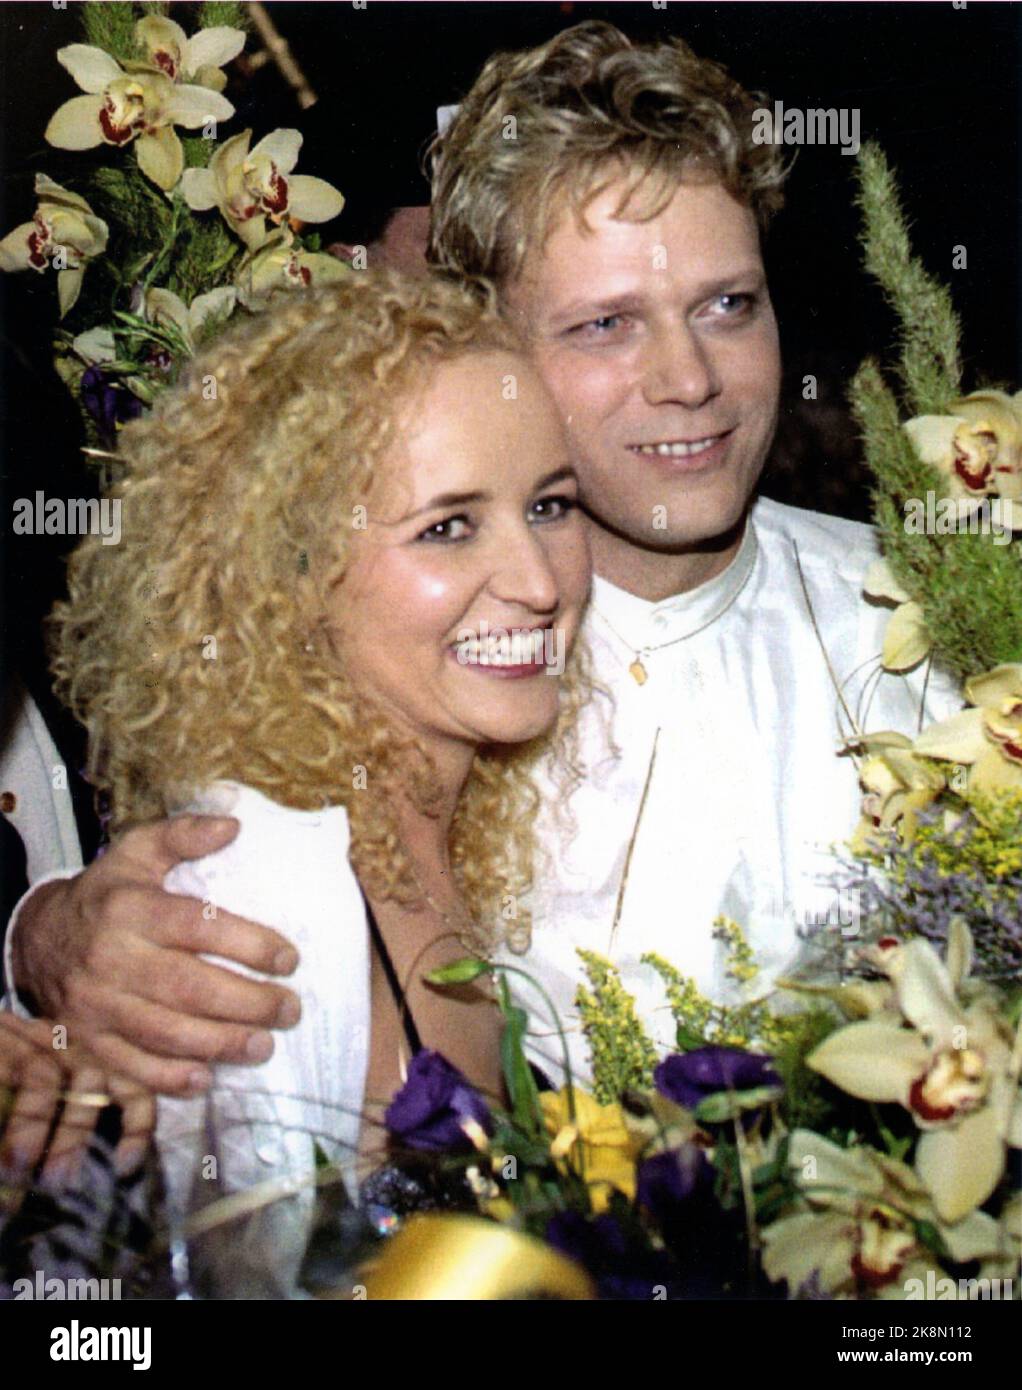 Dublin 19950514. The Norwegian group 'Secret Garden' with Composer Rolf Løvland and violinist Fionnuala Sherry win the Eurovision Song Contest 1995. After the victory. Photo: NTBSCANPIX  Skan66 Stock Photo